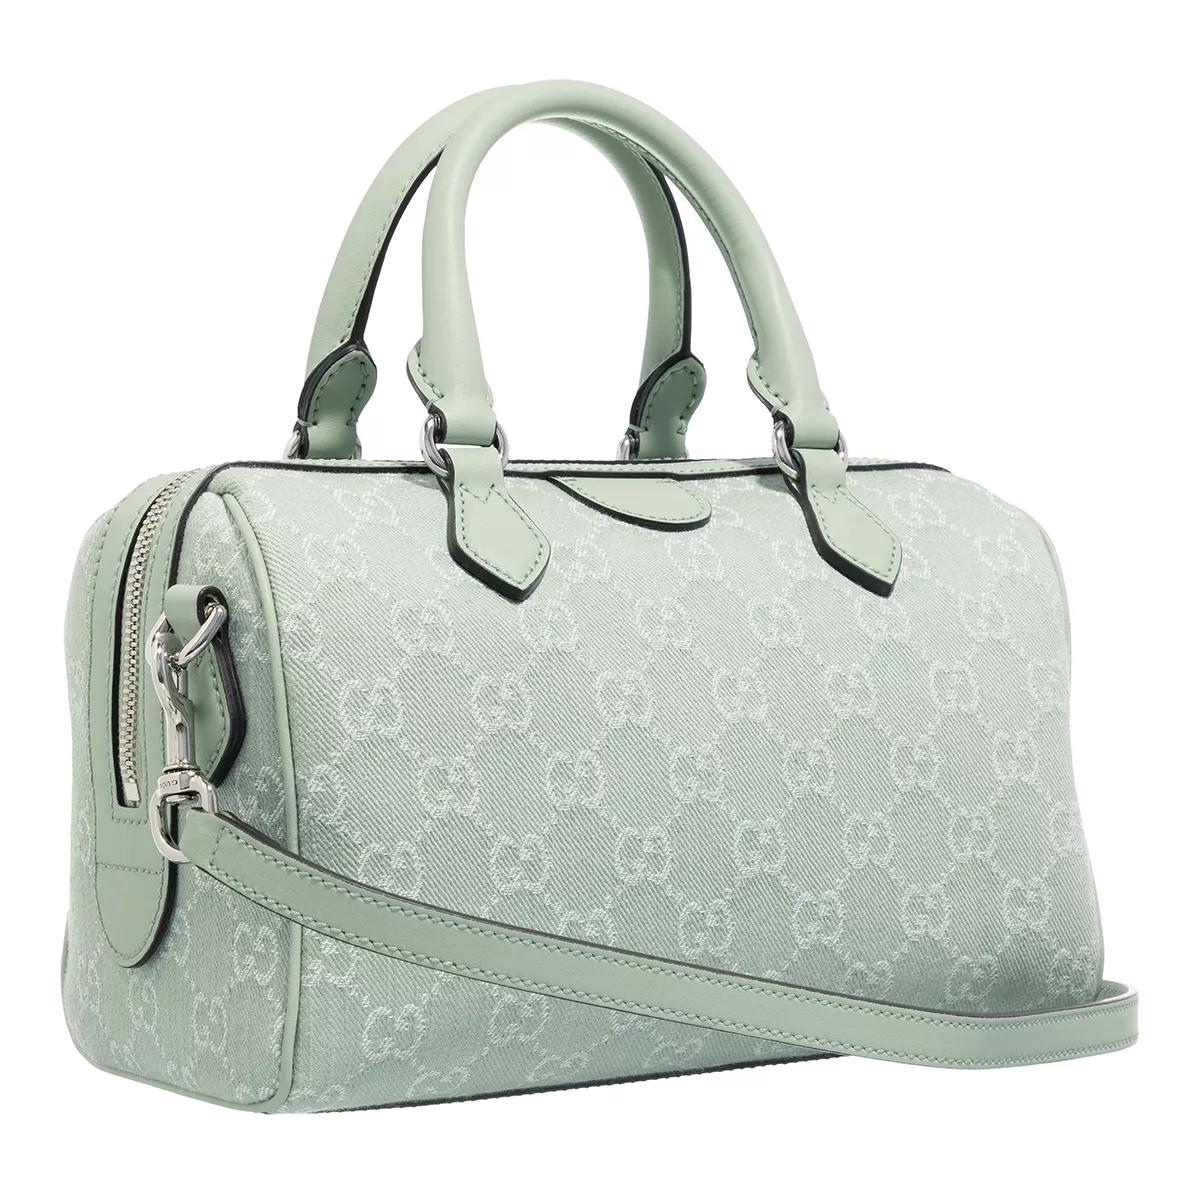 Gucci Satchels Ophidia GG Small Top Handle Bag in groen